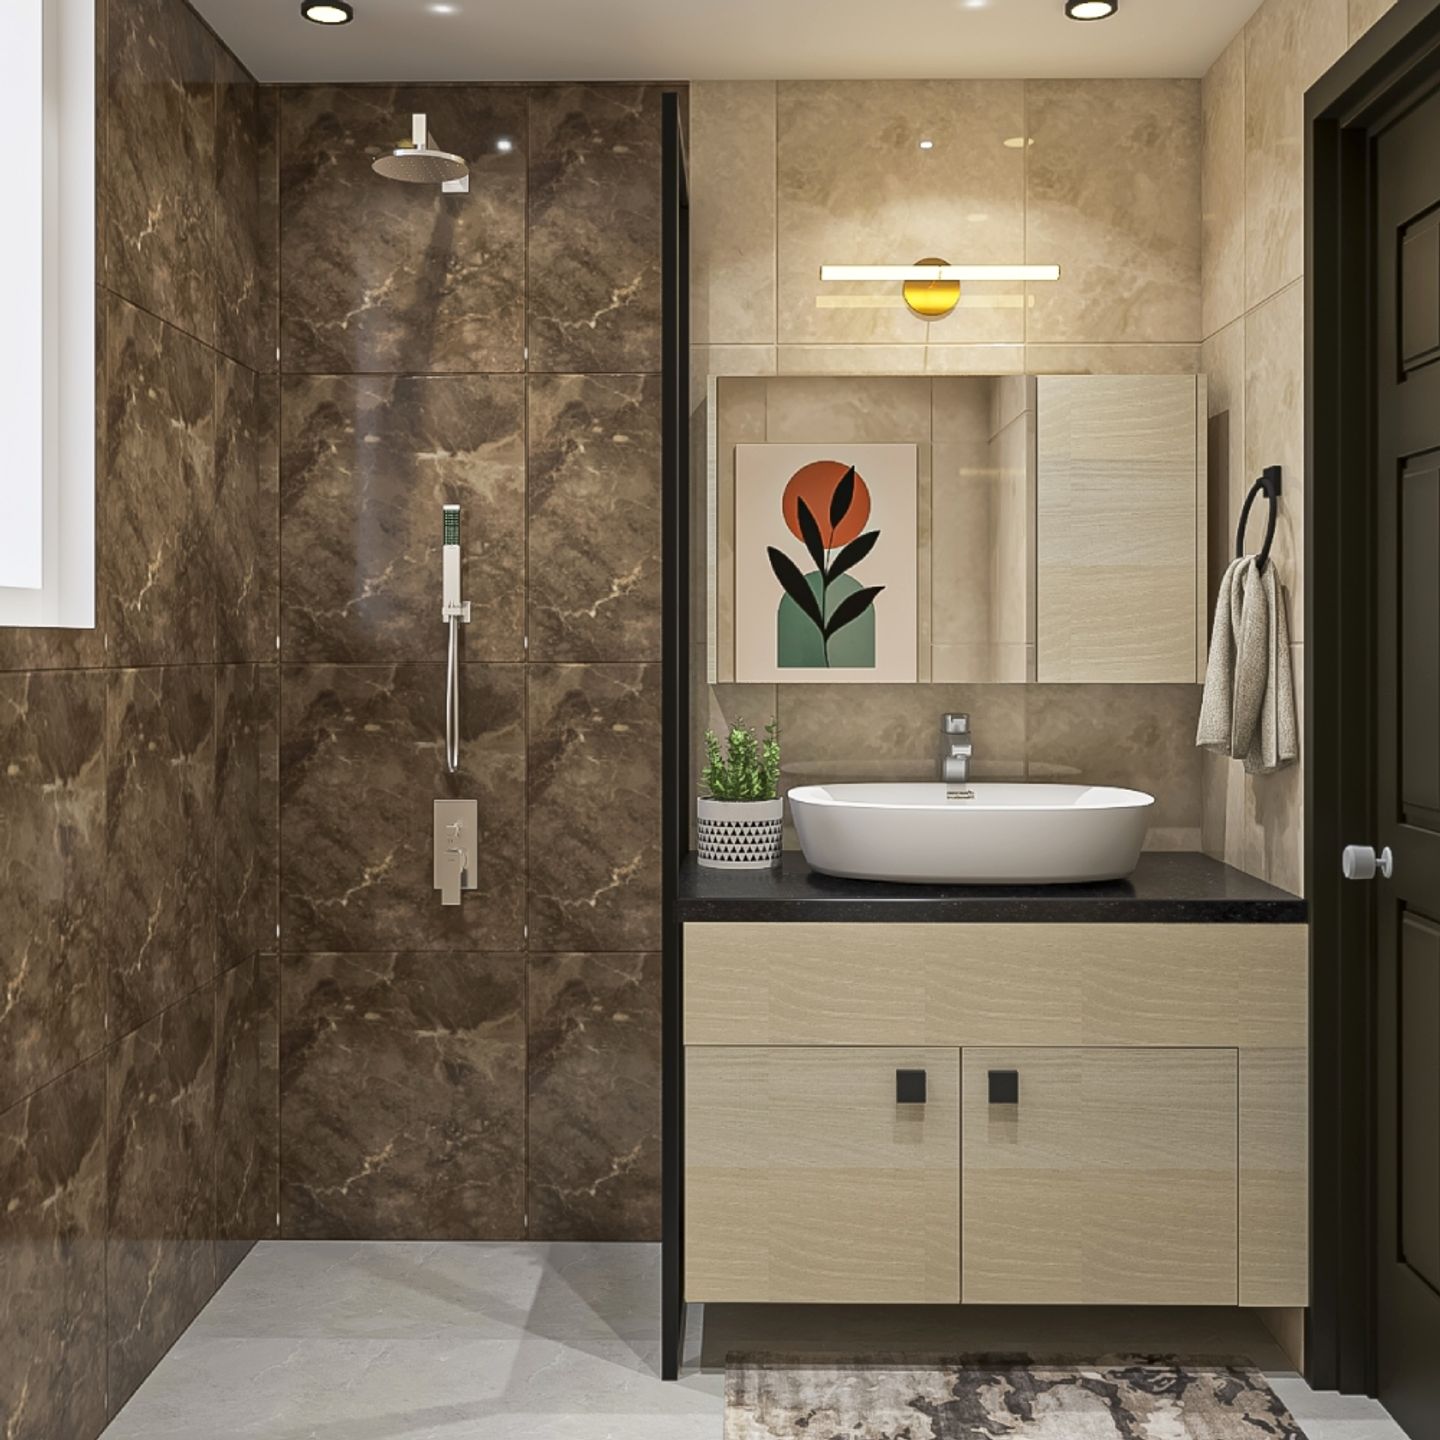 Bathroom Design With Cream And Brown Wall Tiles - Livspace